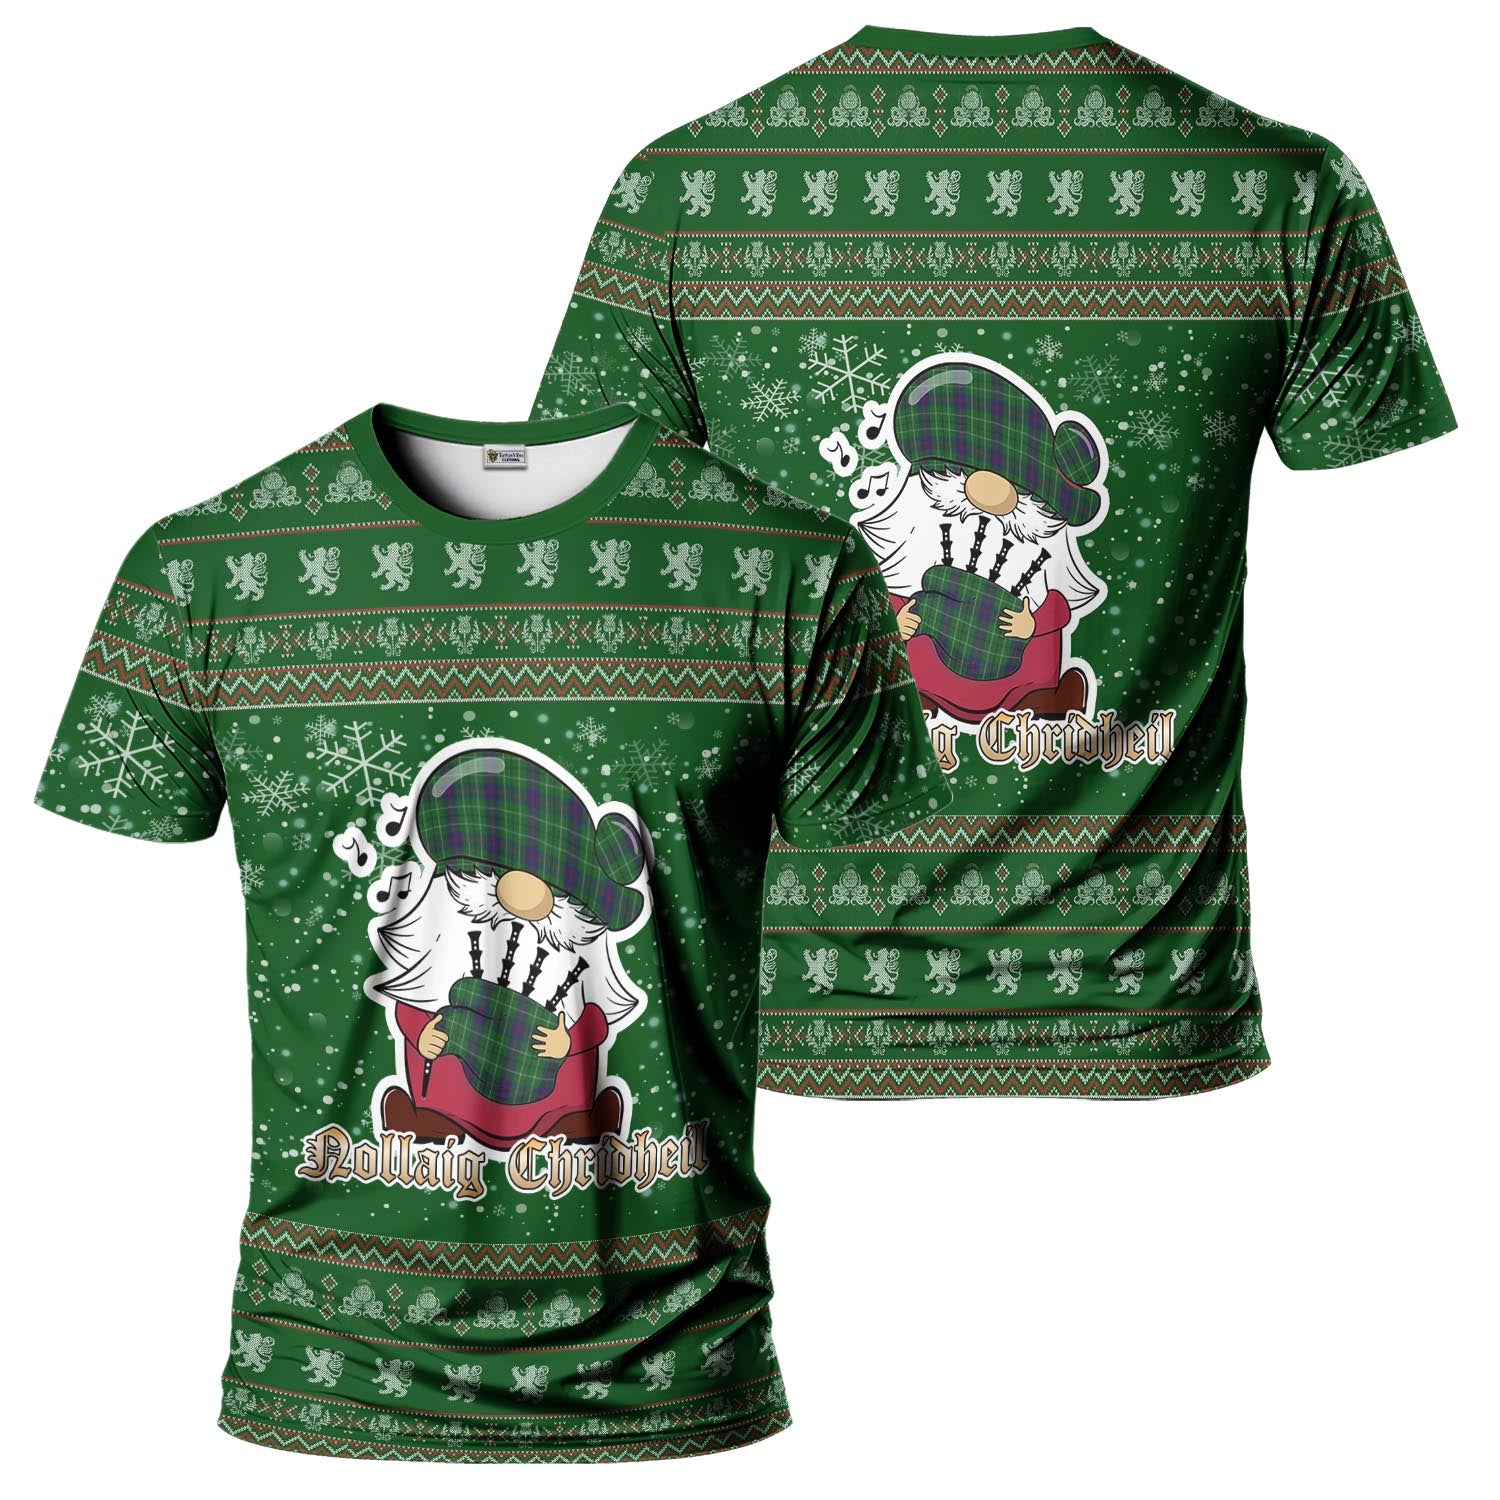 Duncan Clan Christmas Family T-Shirt with Funny Gnome Playing Bagpipes Men's Shirt Green - Tartanvibesclothing